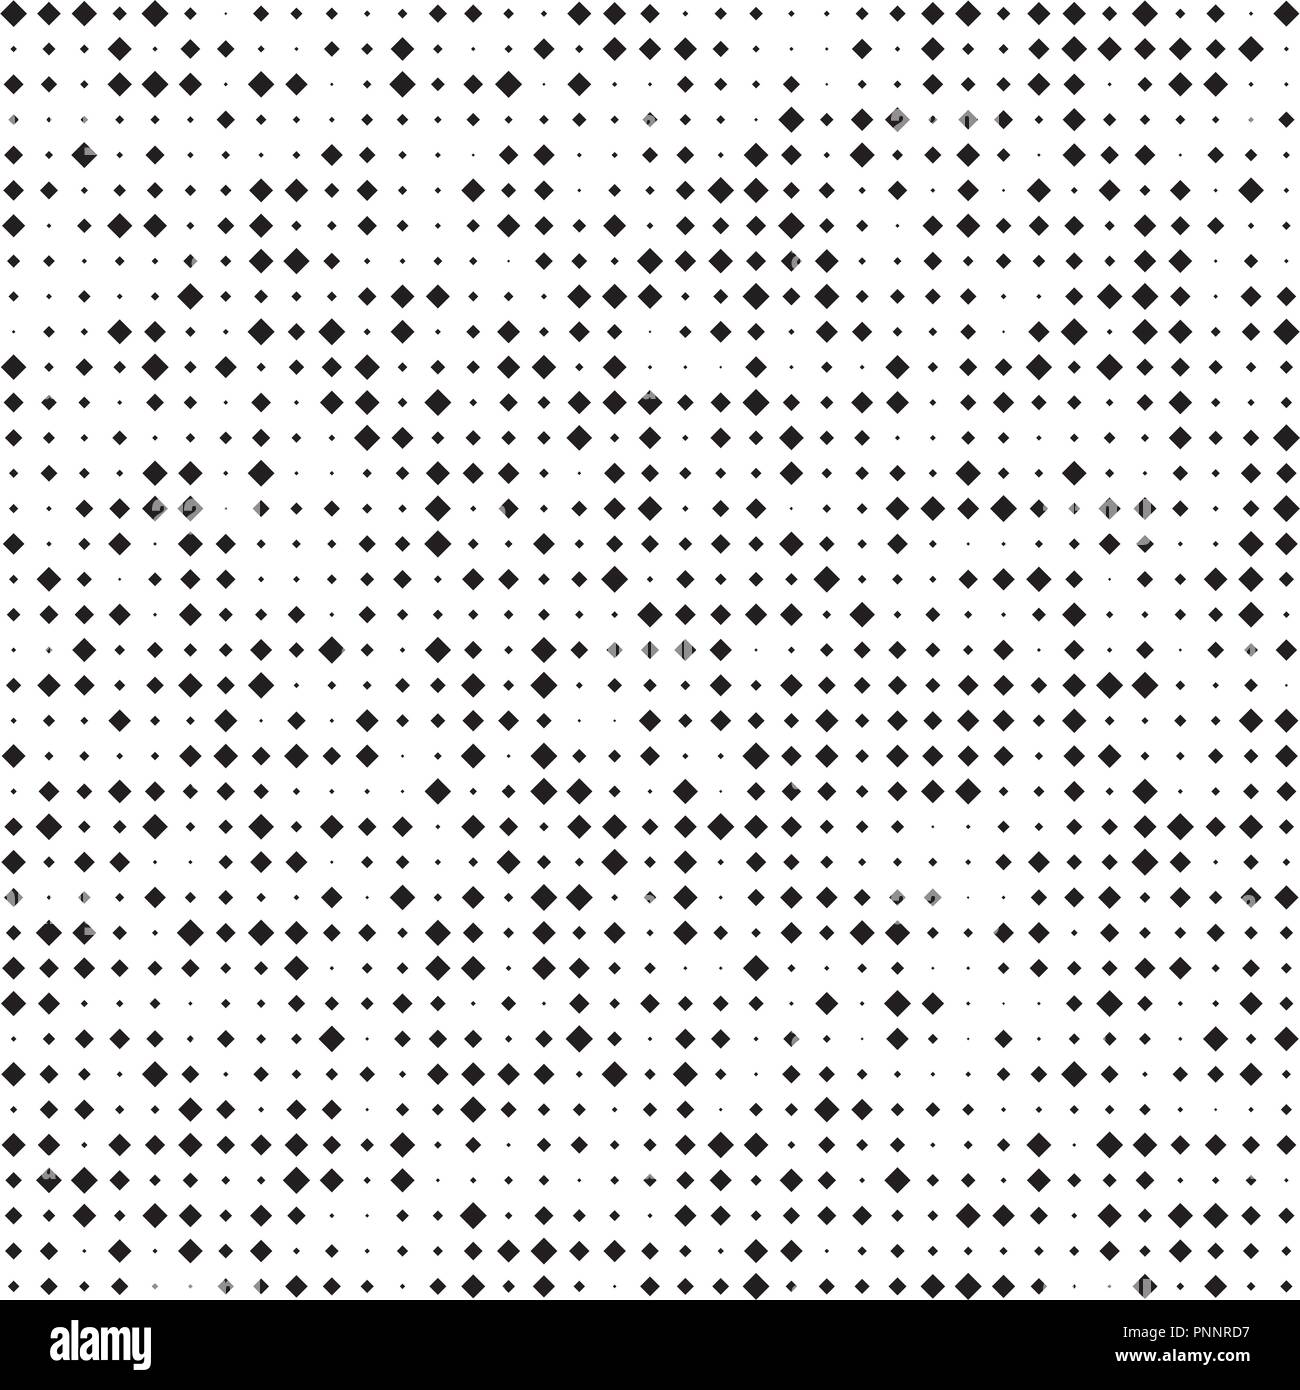 halftone rectangle pattern vector background in eps 10 Stock Vector